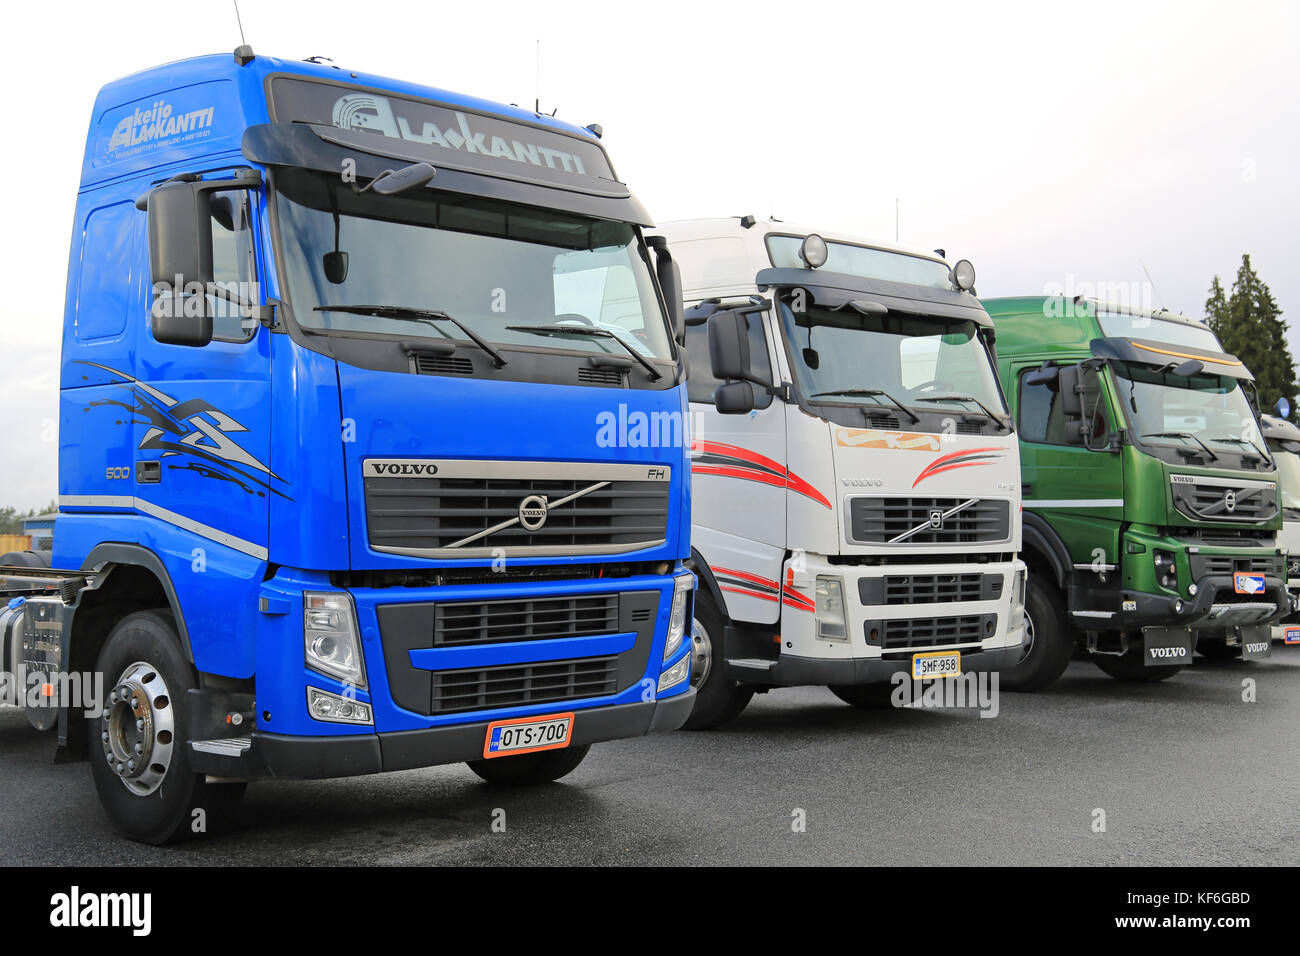 LIETO, FINLAND - NOVEMBER 14, 2015: Lineup of three used Volvo trucks as seen on the Volvo Truck Center Turku Demo Drive and Tire Service Event. Stock Photo